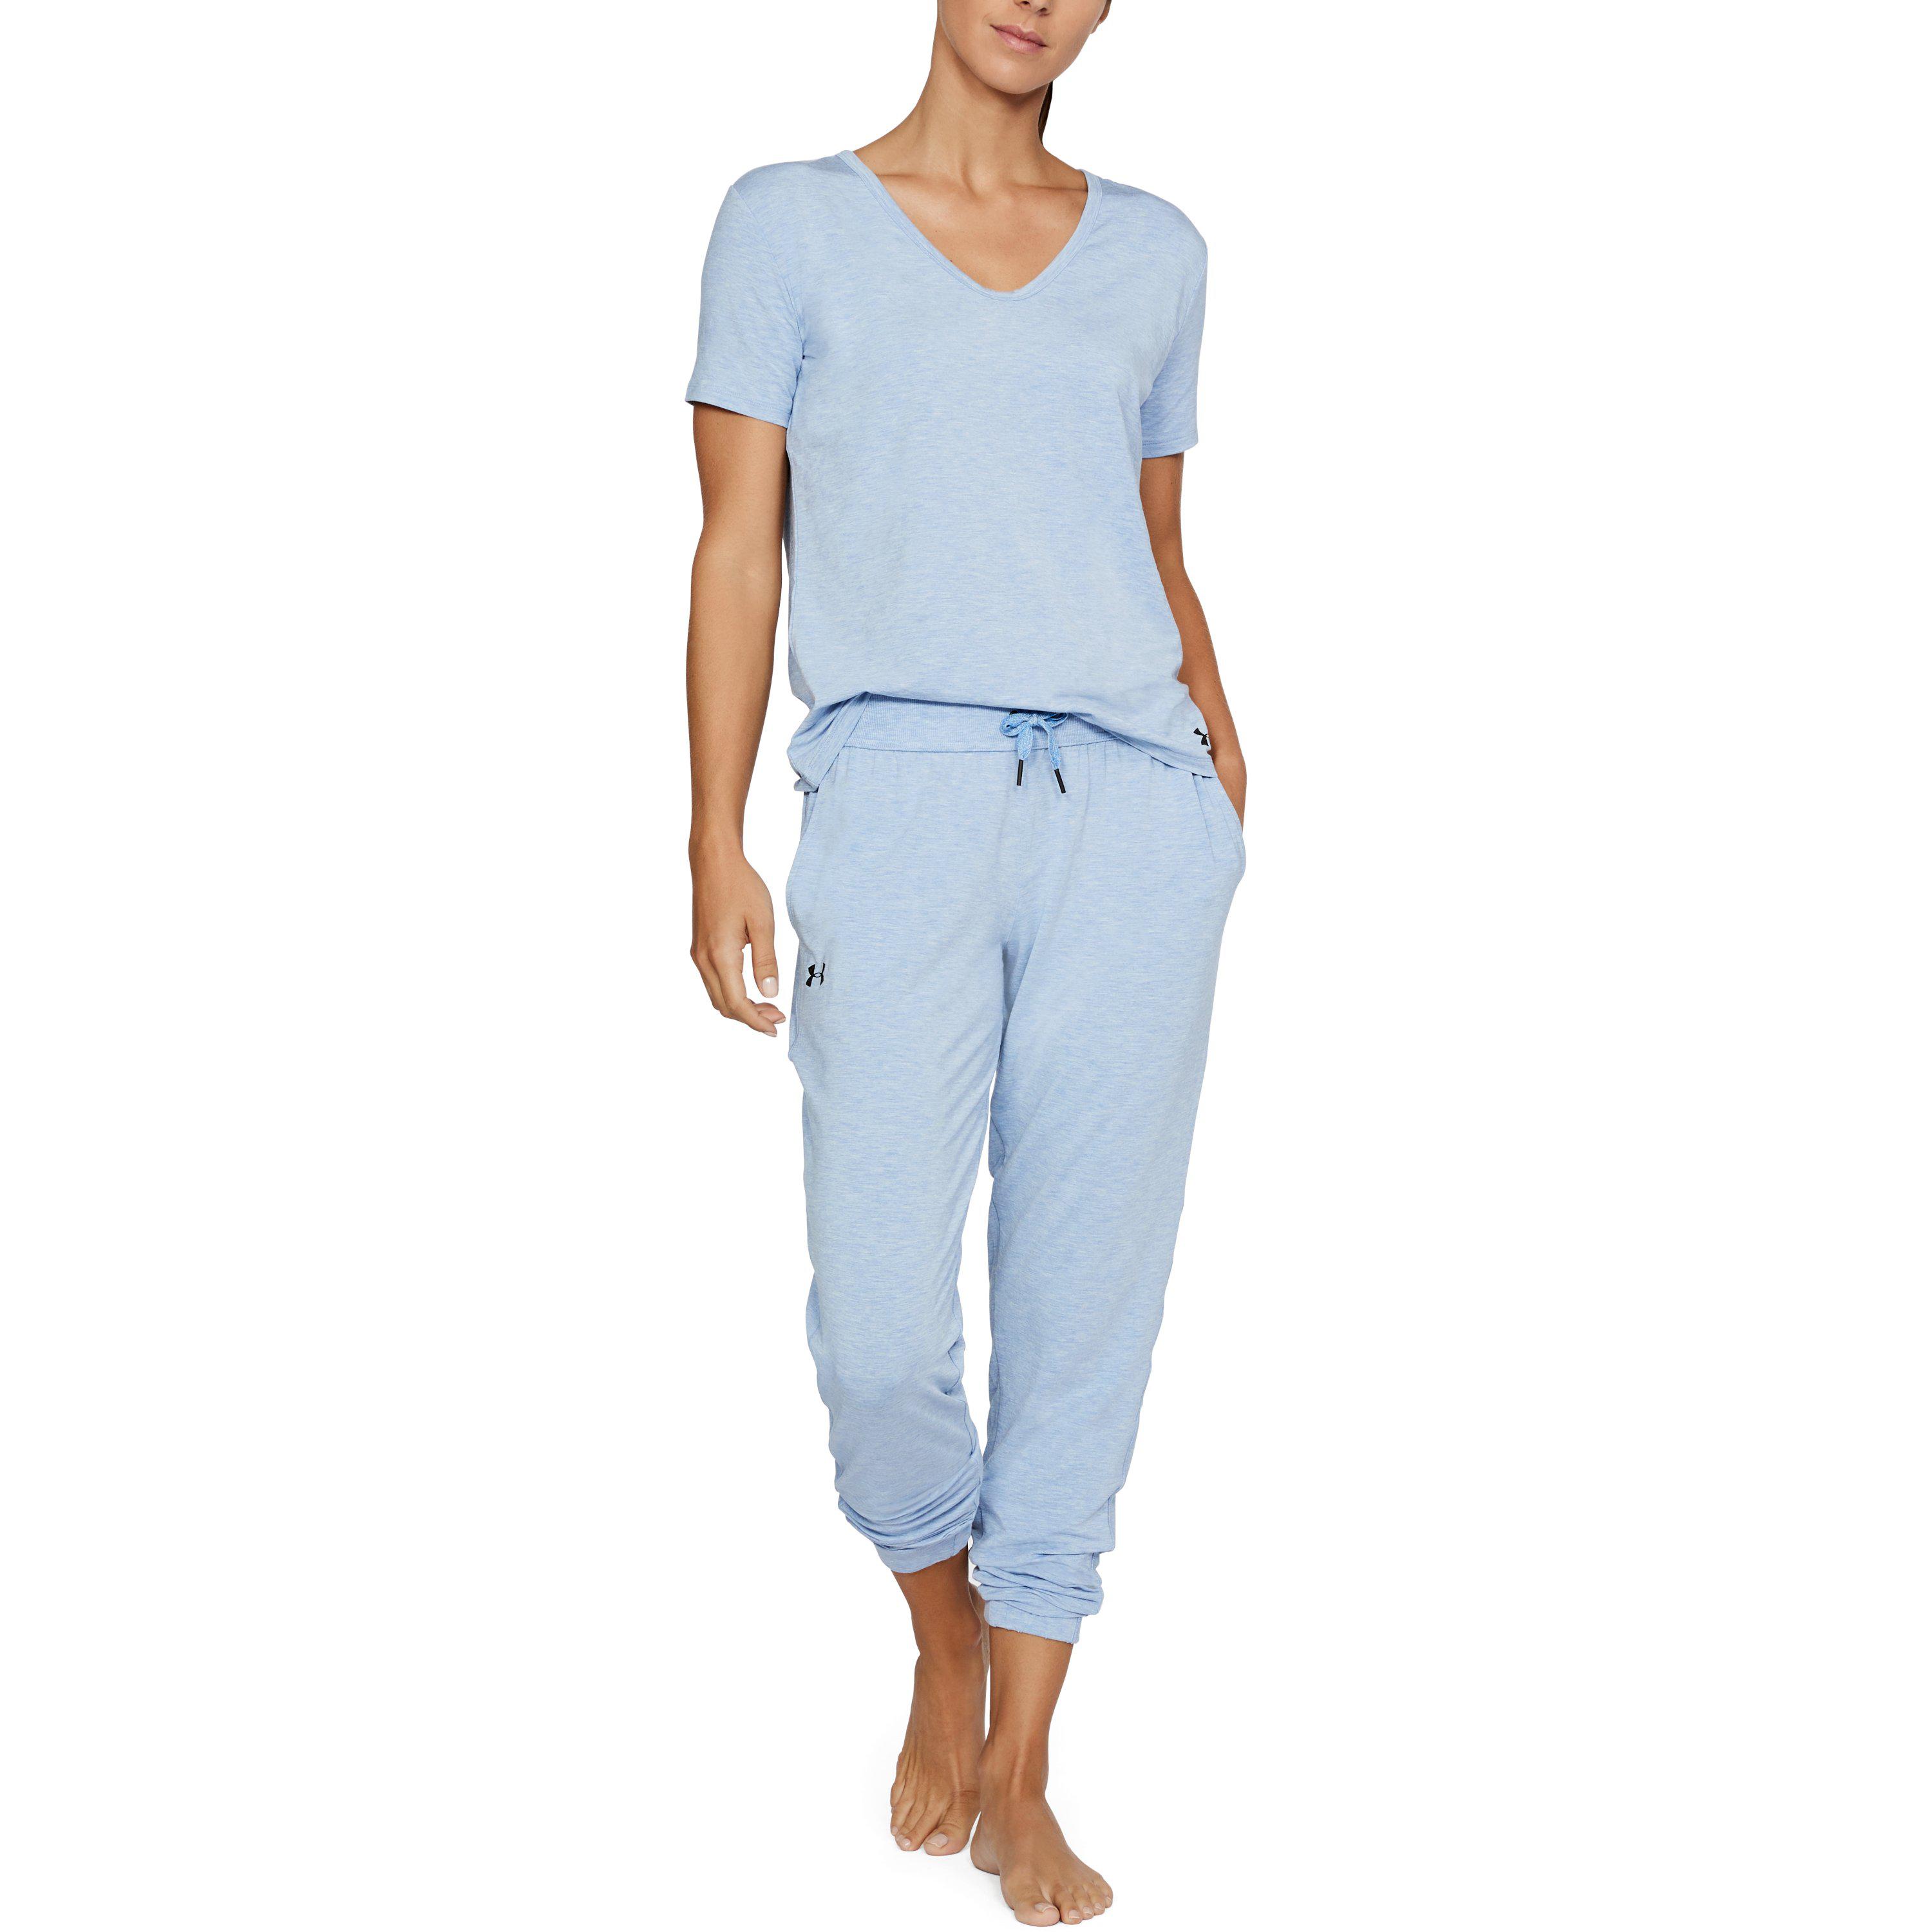 Under Armour Synthetic Women's Athlete Recovery Sleepwear Pants in Blue |  Lyst